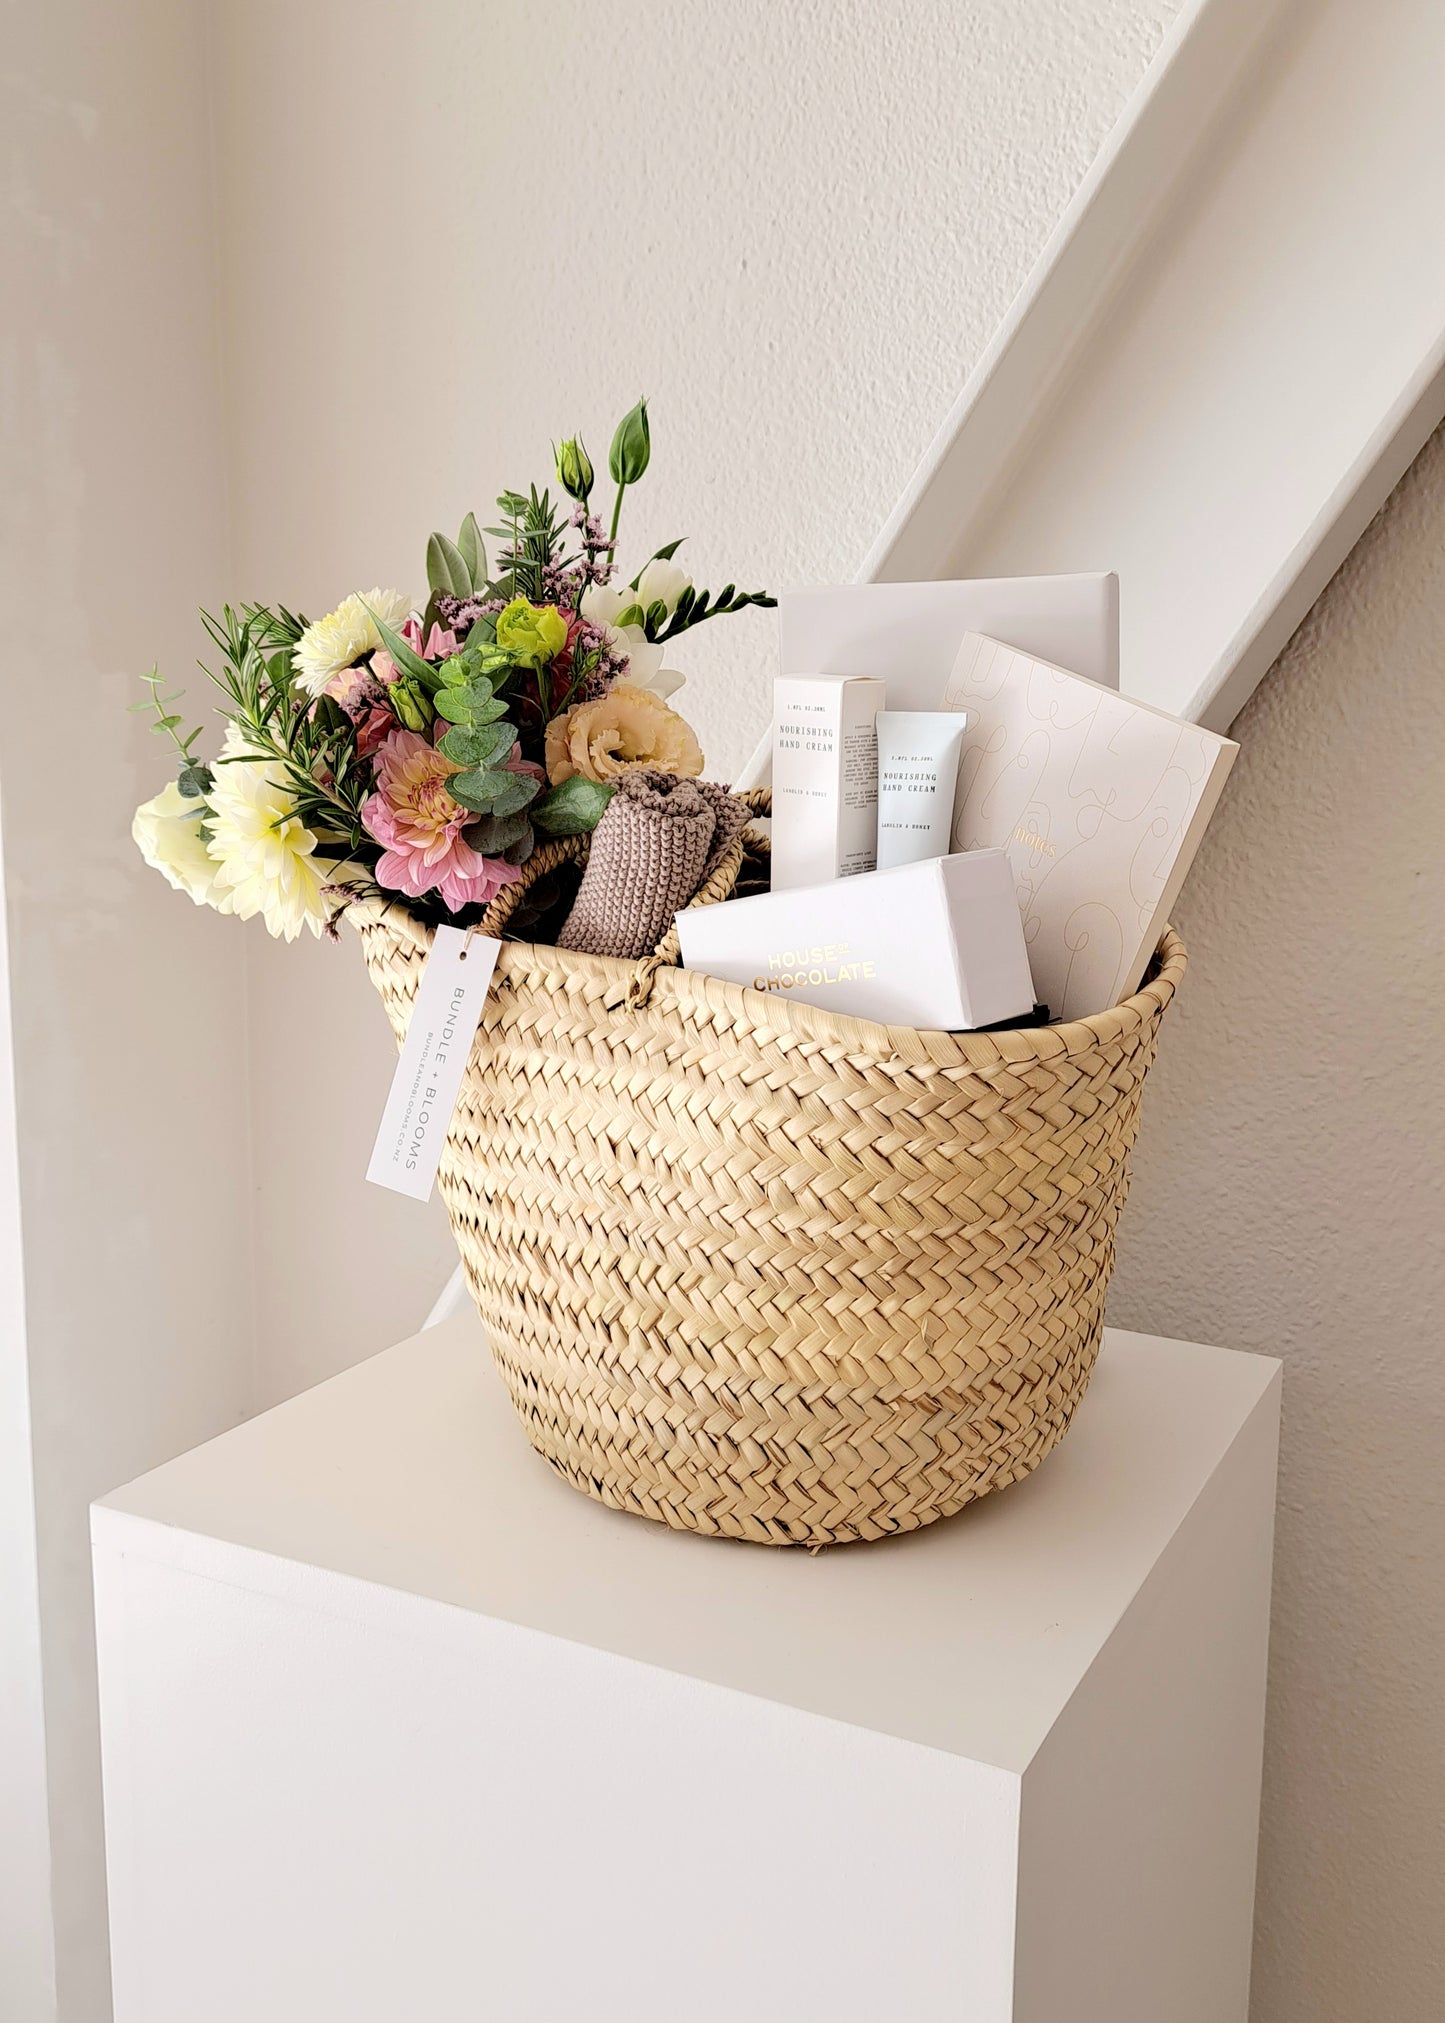 Gift boxes, gifts baskets and gift hampers delivery across New Zealand by Bundle + Blooms